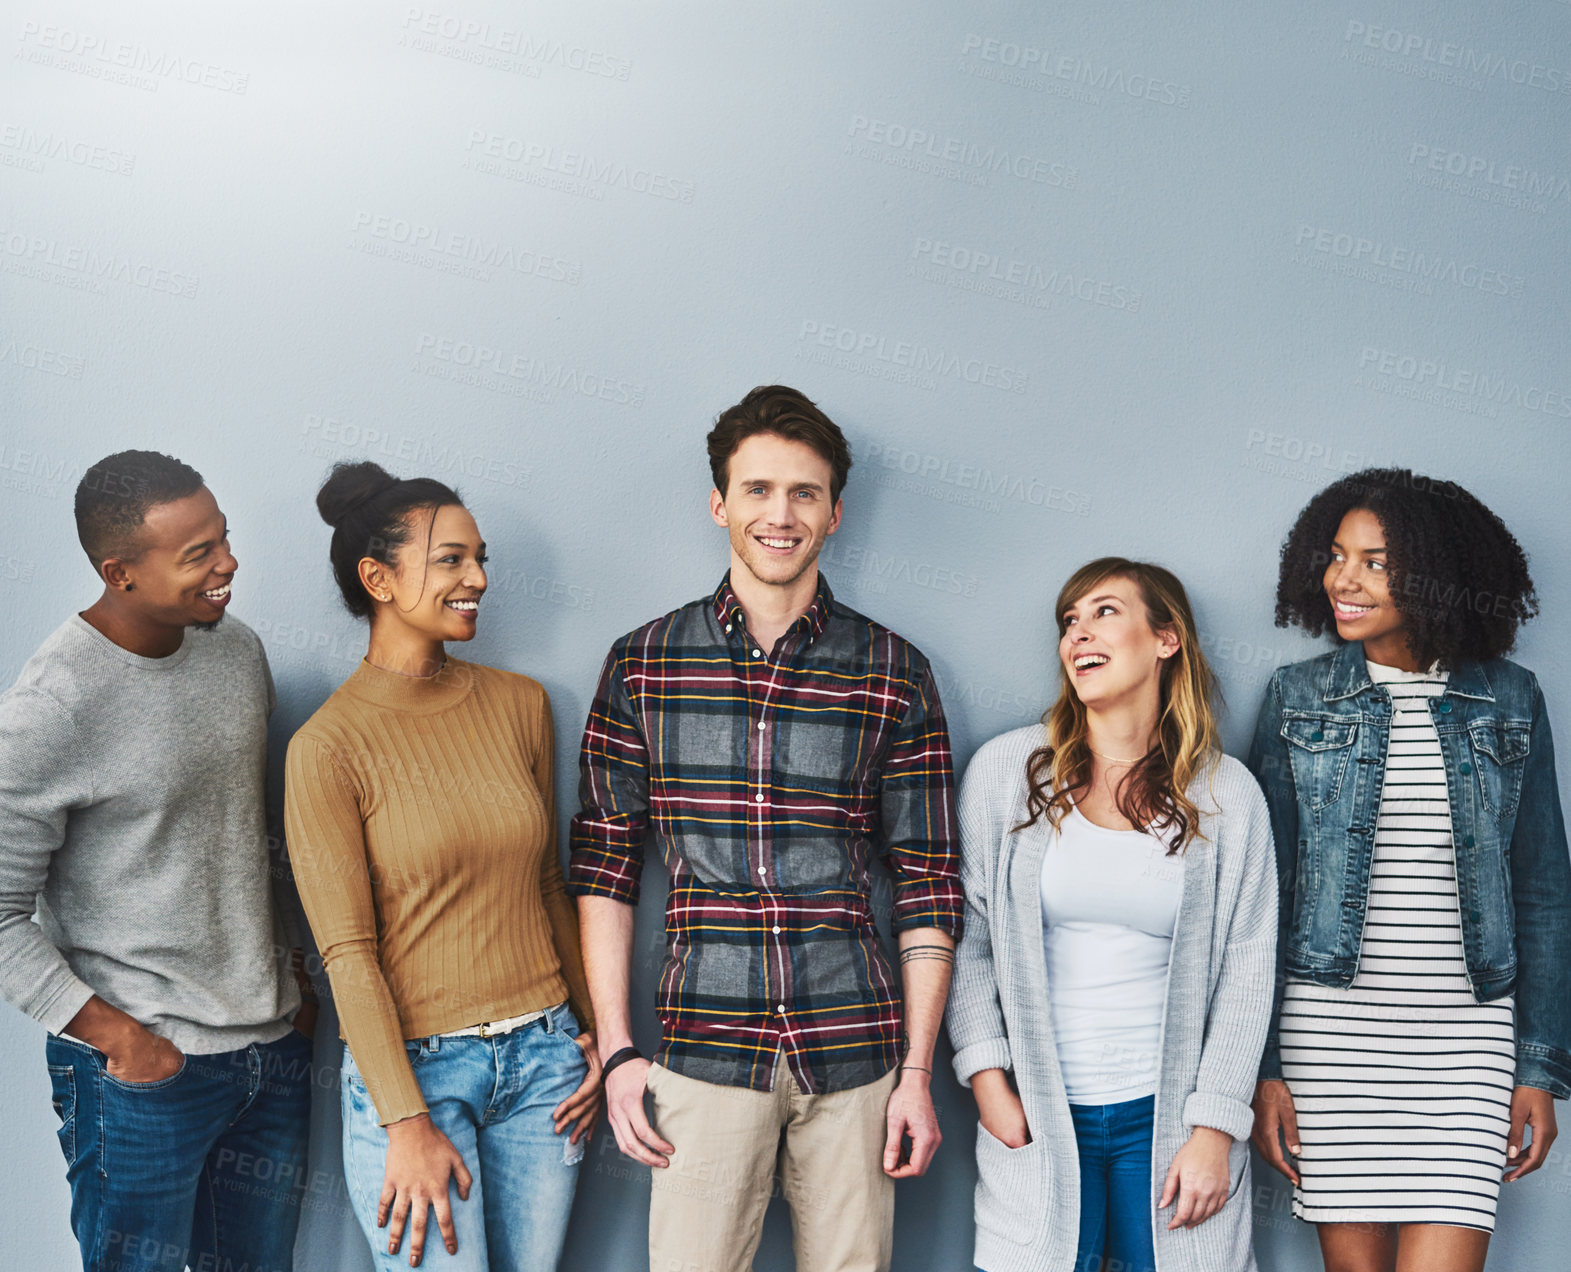 Buy stock photo Studio portrait of a diverse group of young people standing together against a gray background